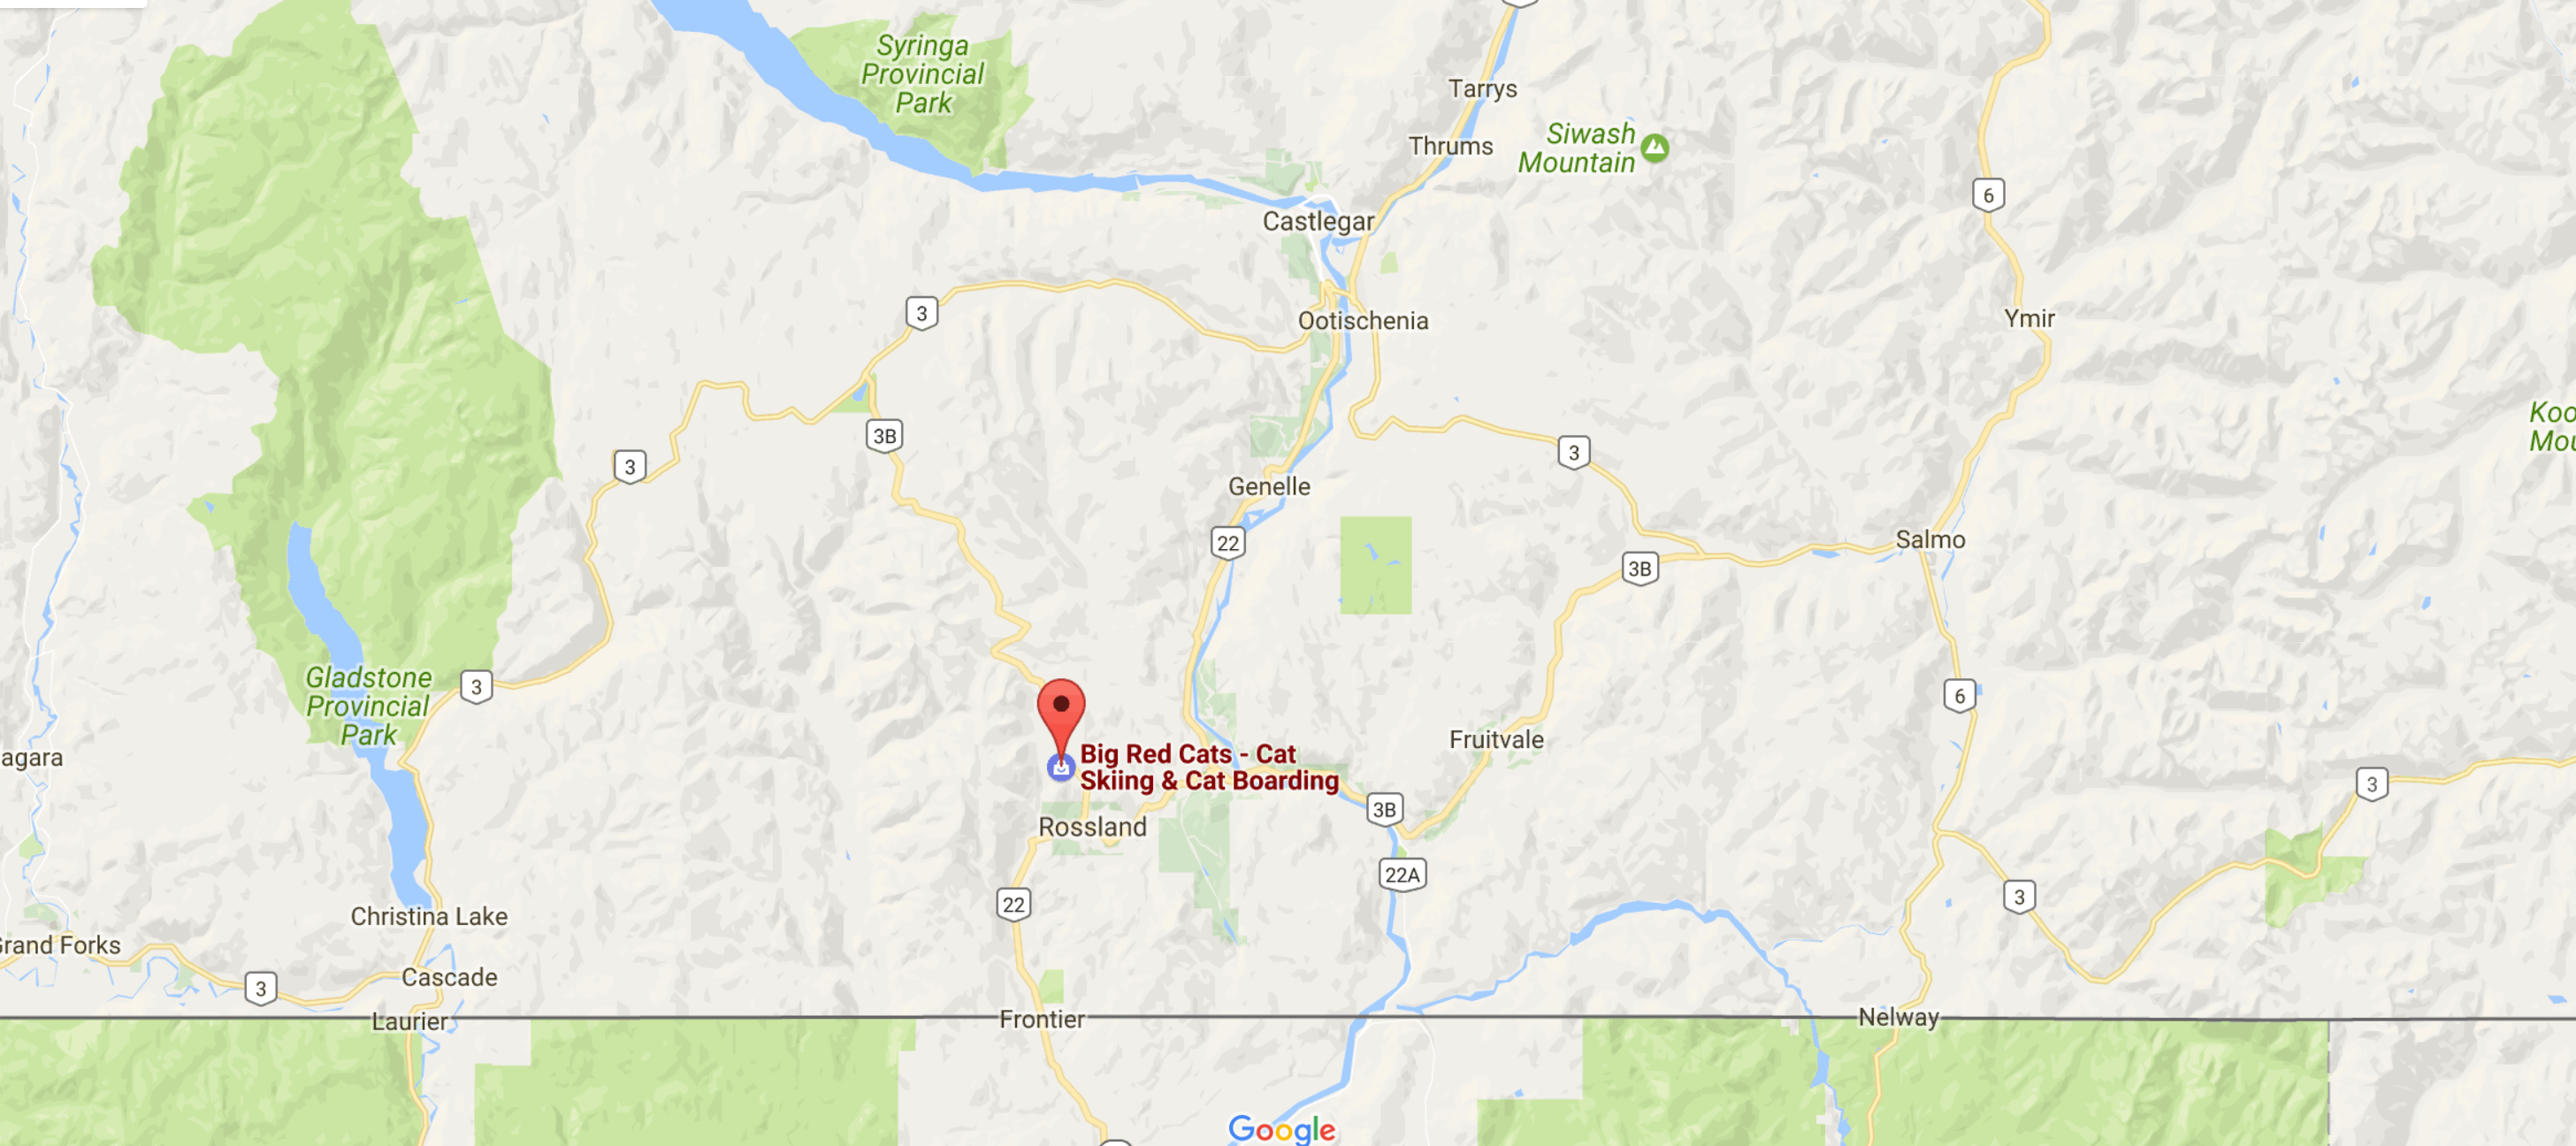 The red pin marks where the avalanche occurred. Just north of Rossland, British Columbia, Canada. // photo: Google Maps